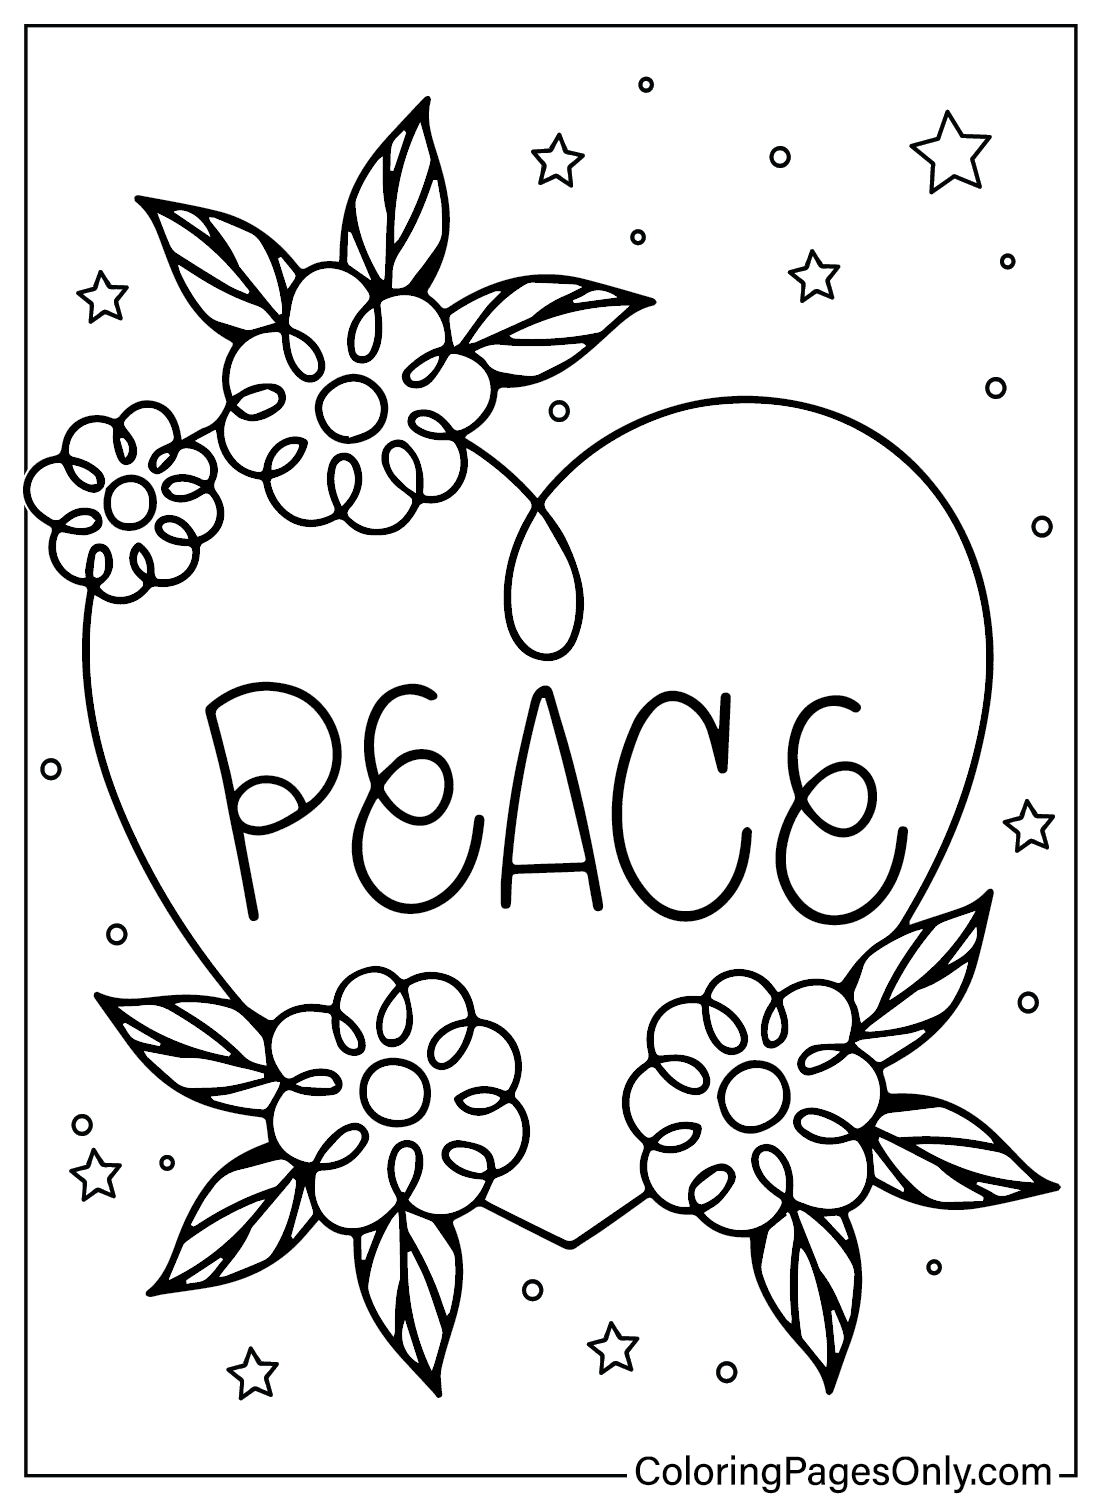 Coloring Sheet International Day of Peace from International Day of Peace